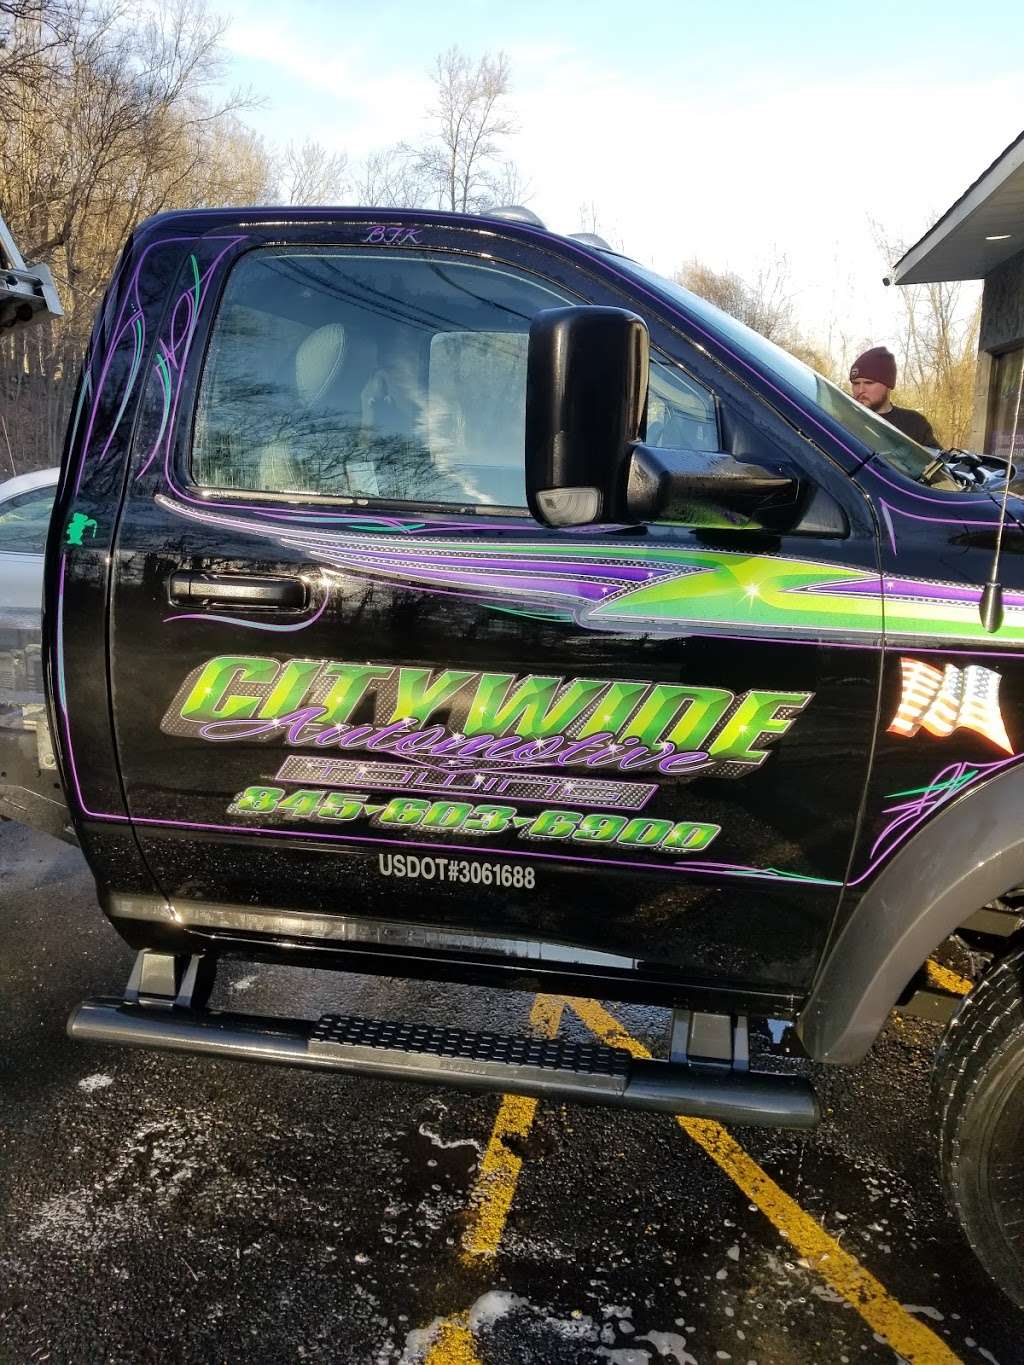 Citywide Automotive | 824 Peekskill Hollow Rd, Putnam Valley, NY 10579 | Phone: (845) 603-6900